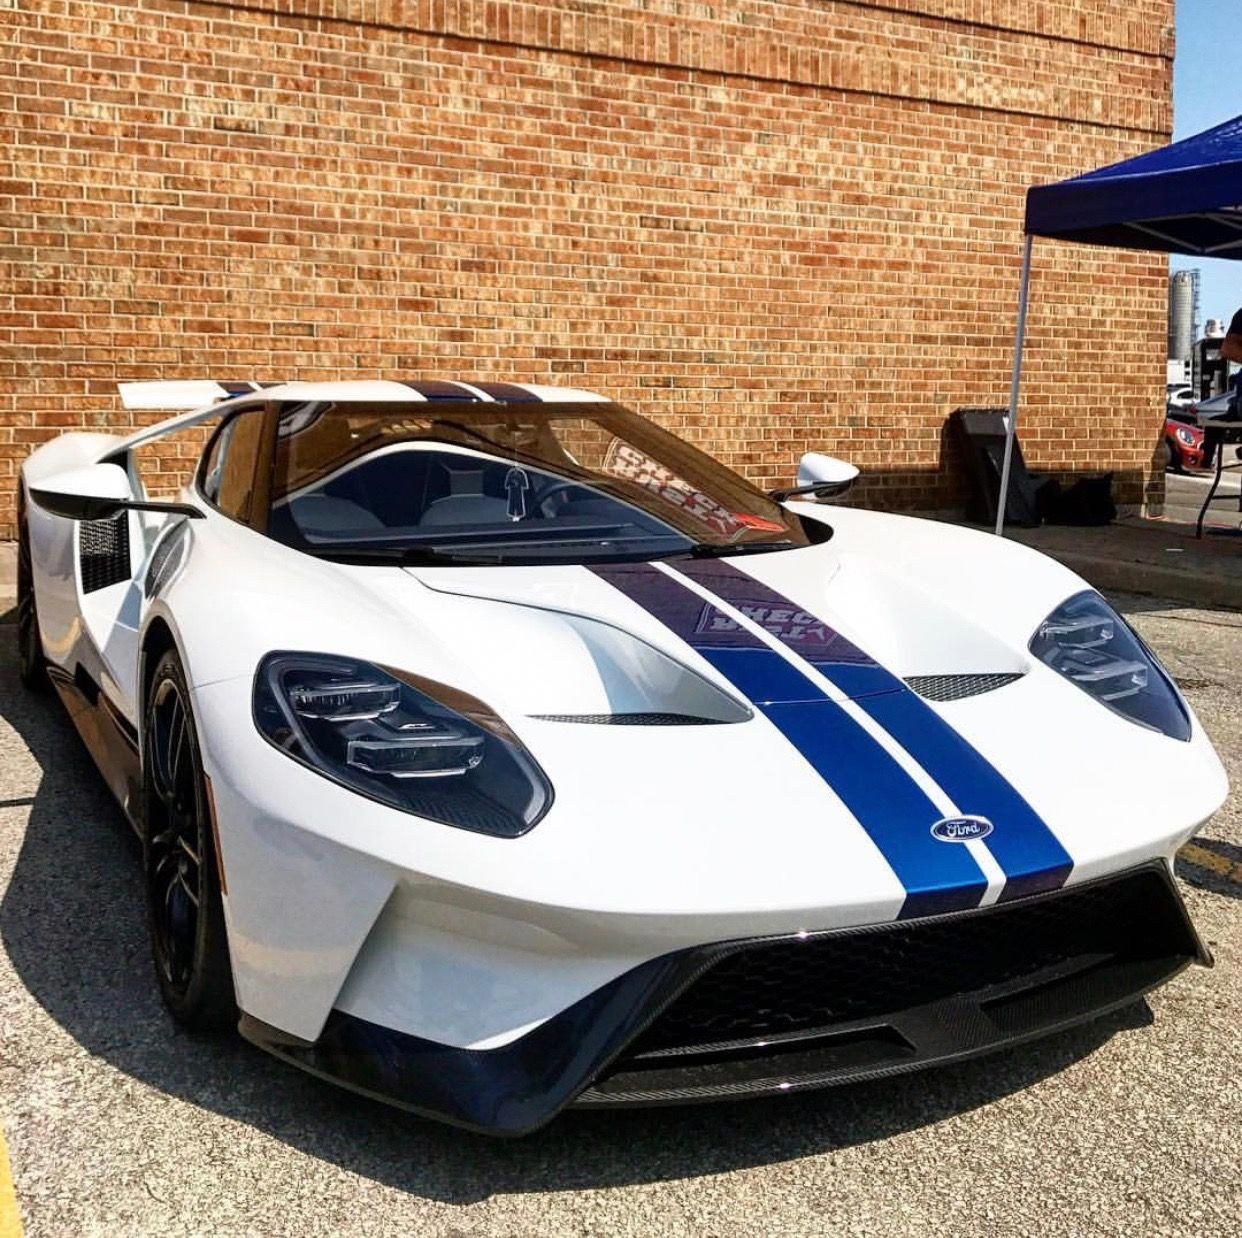 Take a look at the exterior and trim on this particular brilliant #customfordgt